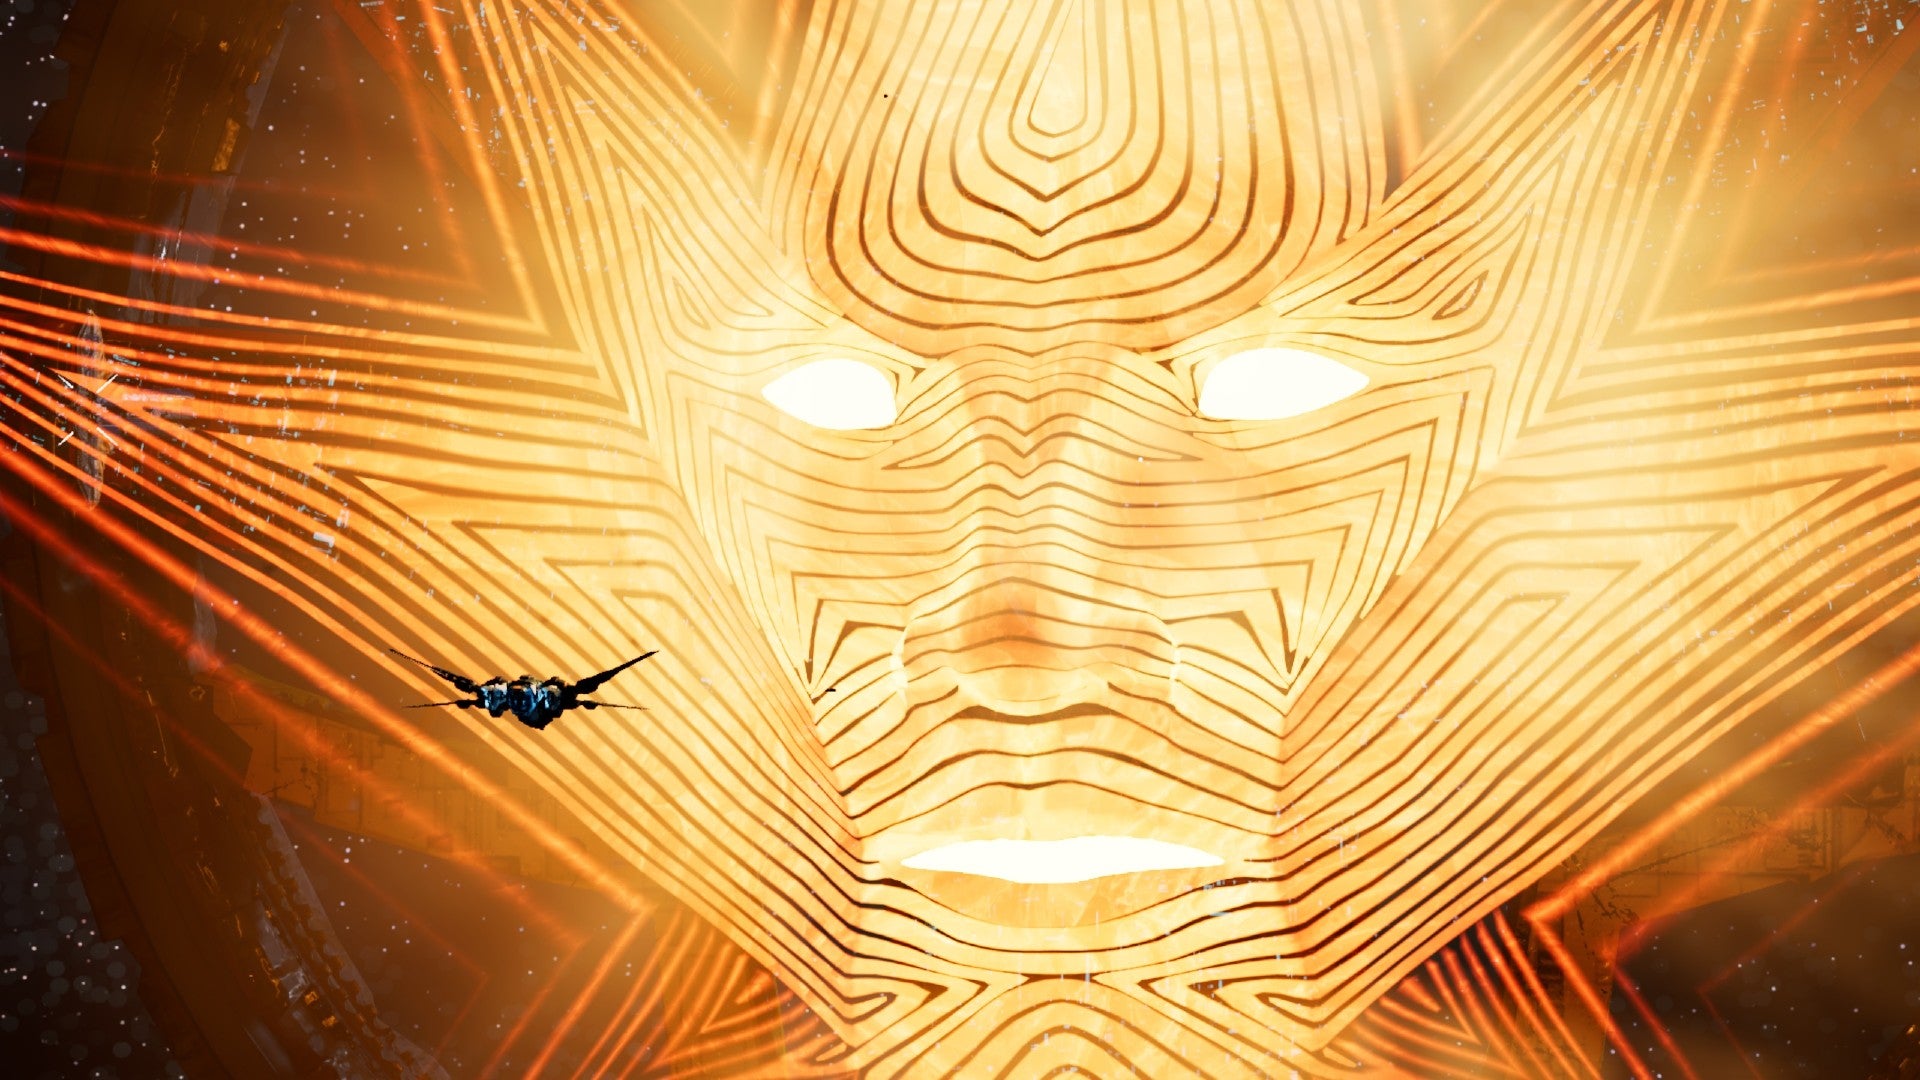 The Milano ship facing the huge Worldmind projection in Guardians Of The Galaxy